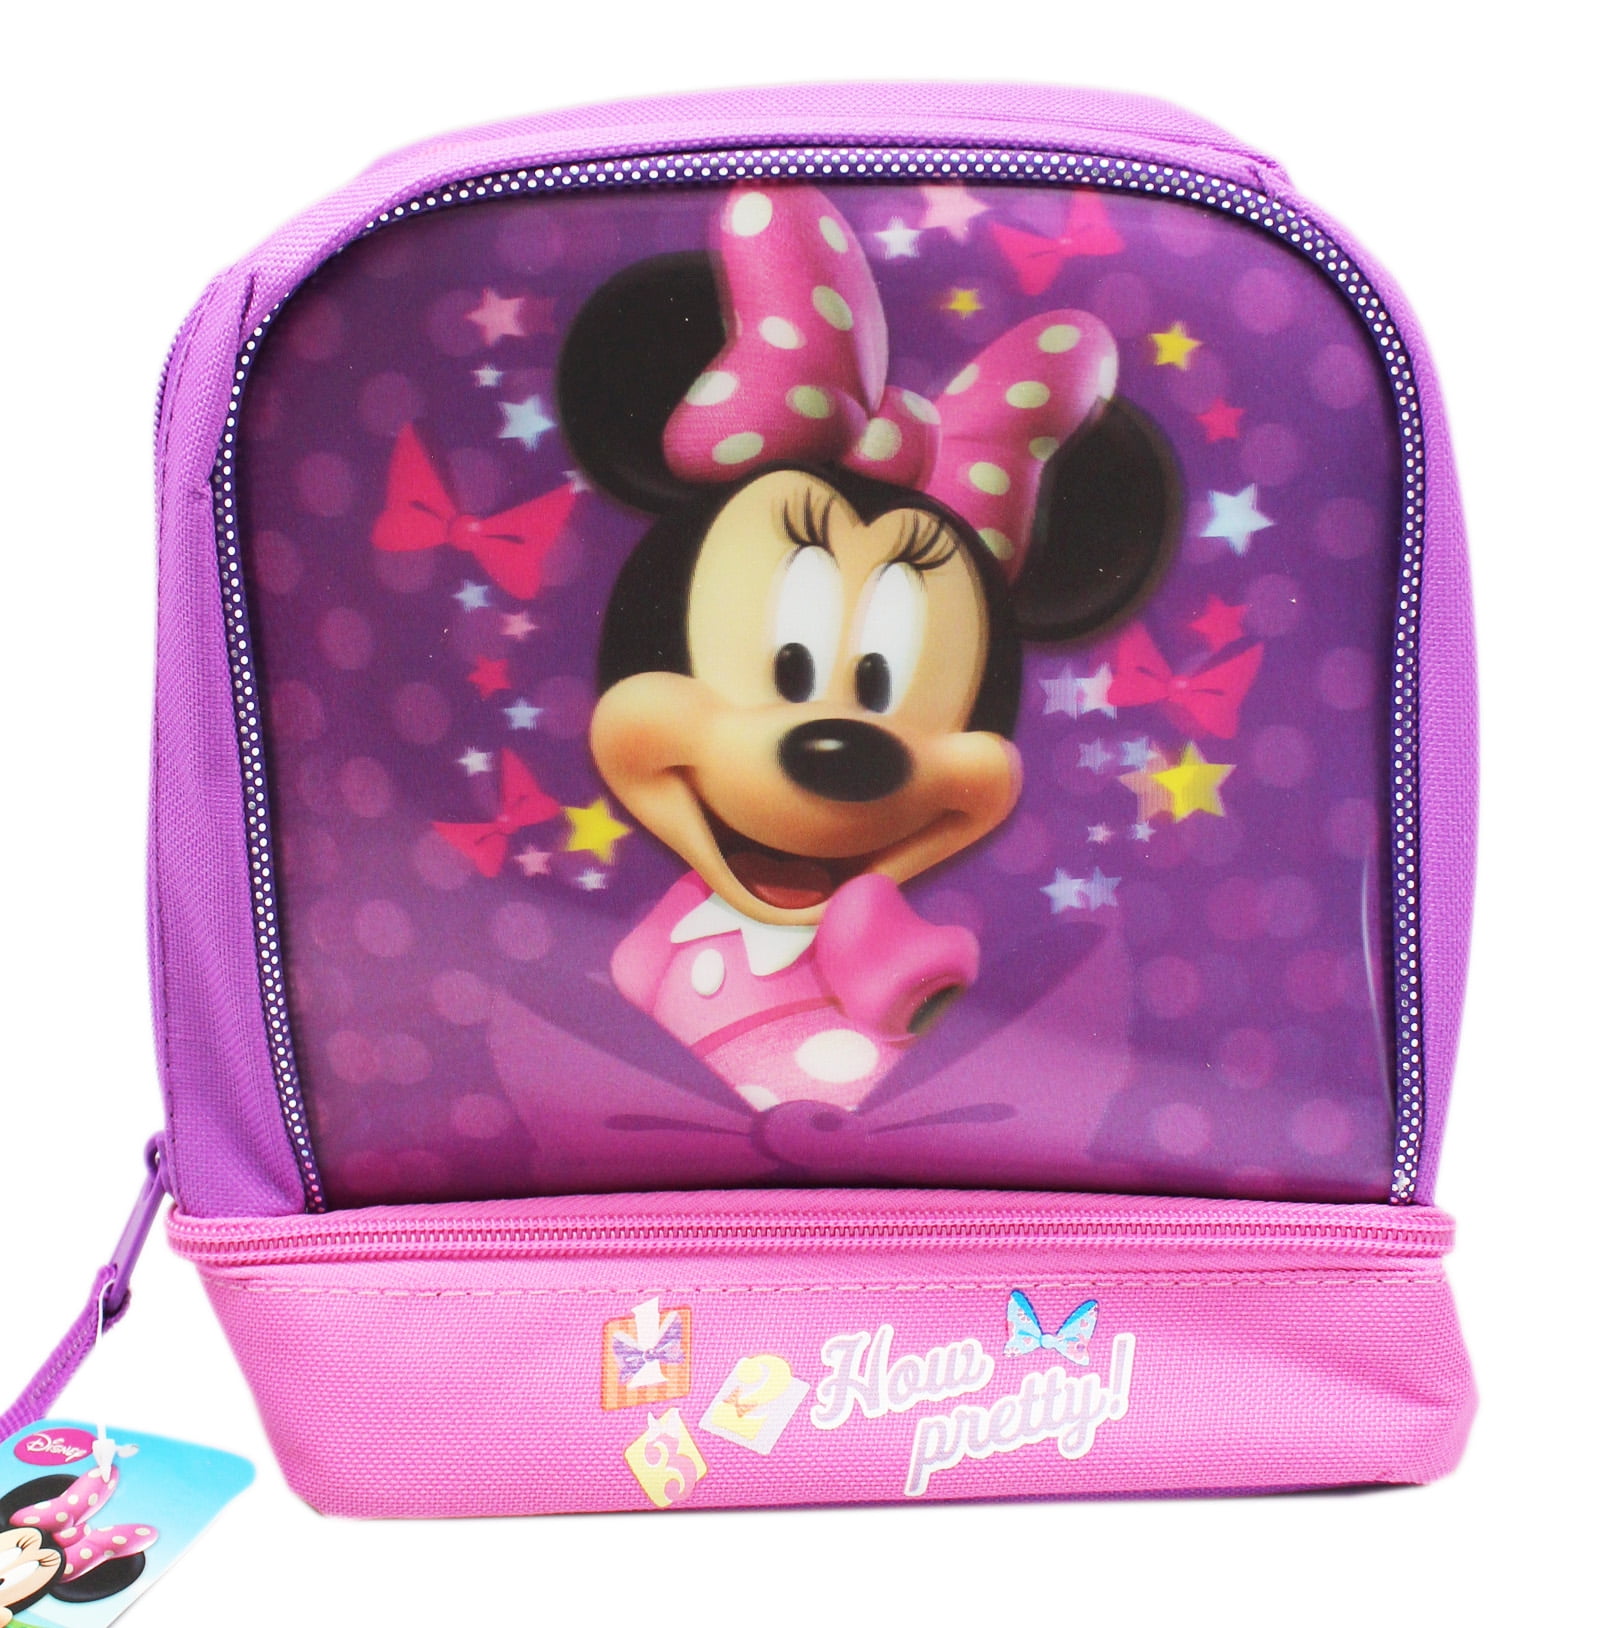 Minnie Mouse Kids Lunch Box With 3D Effect Lid 4 Clip Lock Snack Pot Secure 